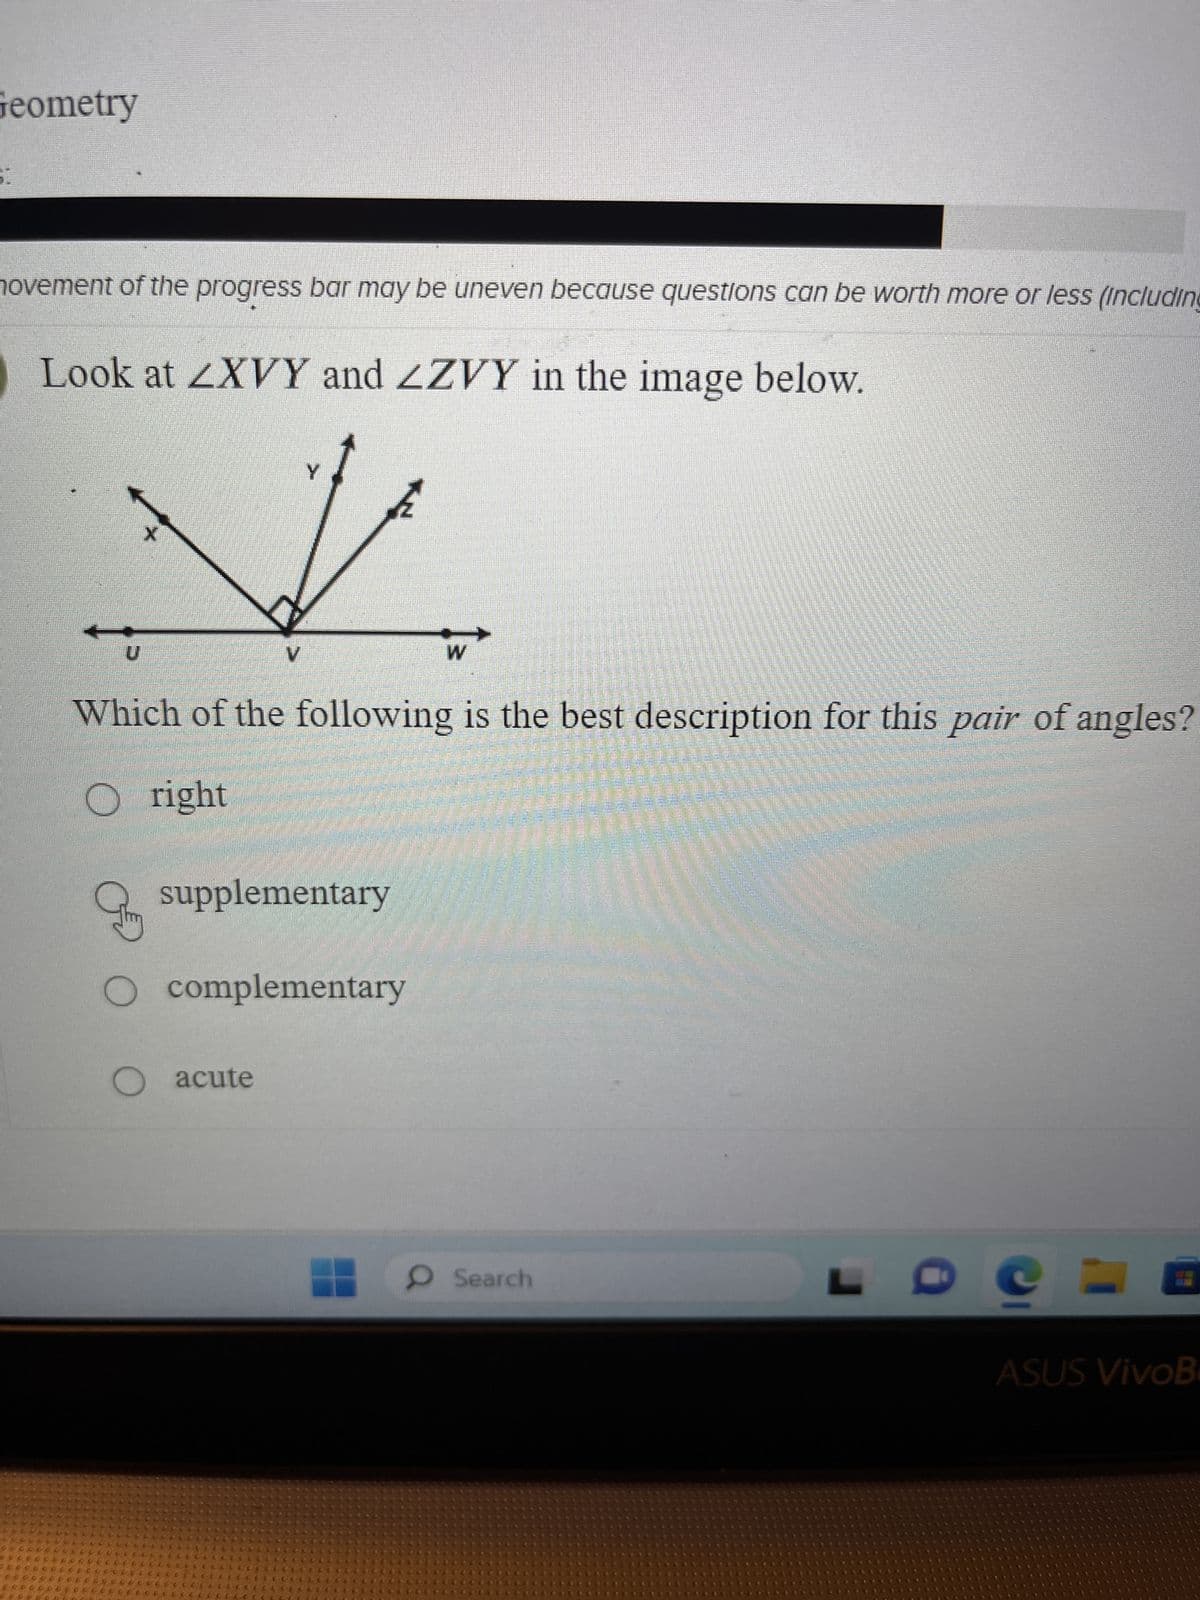 Geometry
movement of the progress bar may be uneven because questions can be worth more or less (including
Look at LXVY and ZZVY in the image below.
U
£
Which of the following is the best description for this pair of angles?
Oright
supplementary
O complementary
O acute
CELLCCCCCCCCC
CCCCCCCCCC
CL COLLE
W
O Search
ASUS VivoB